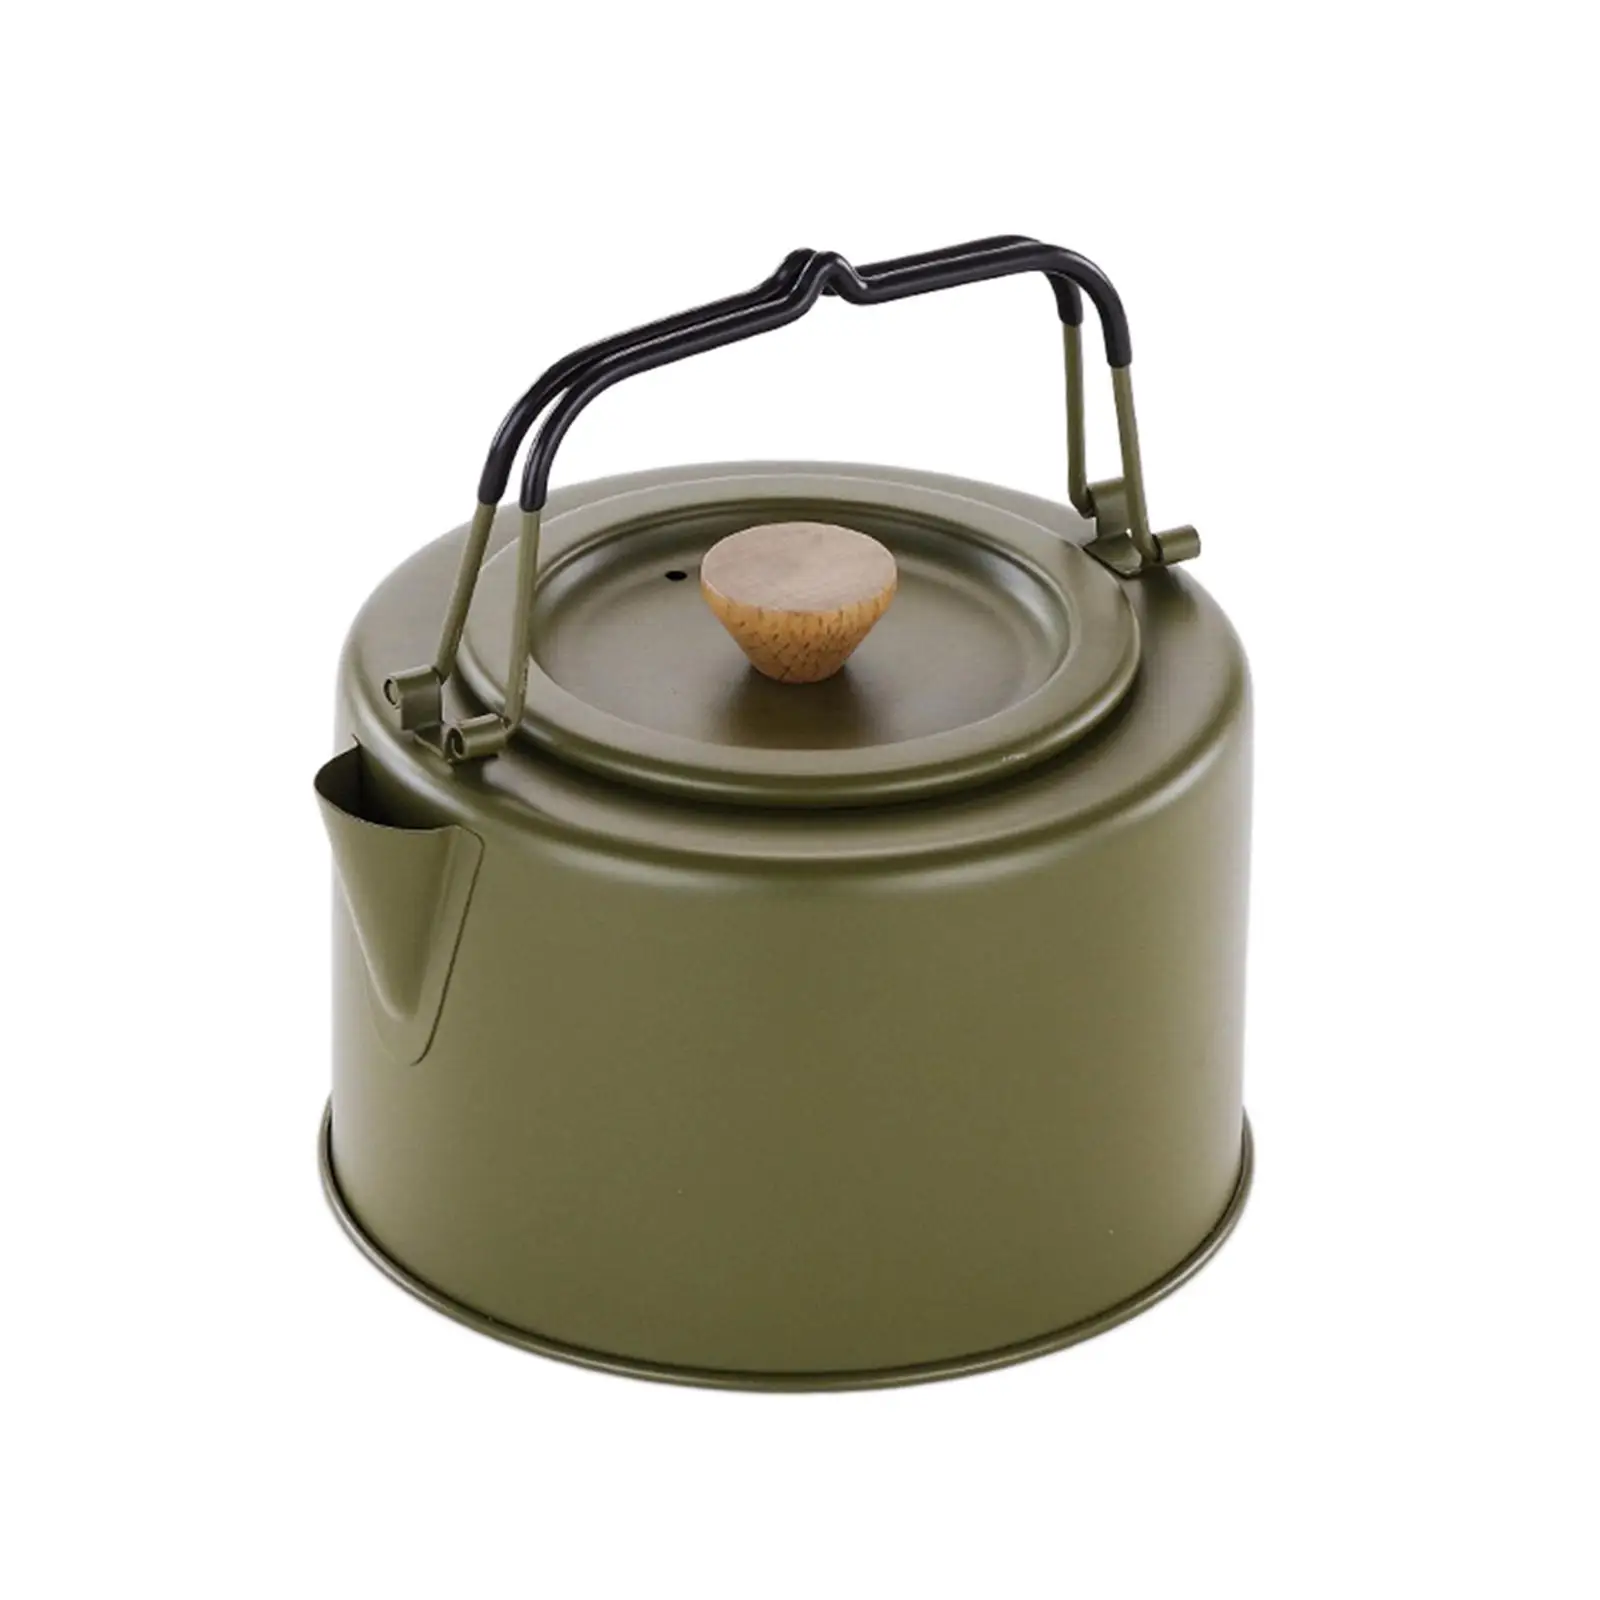 Camping Water Kettle Teapot Cookware Lightweight Anti Scald Handle Water Boiler for Hiking Kitchen Backpacking Fishing Barbecue